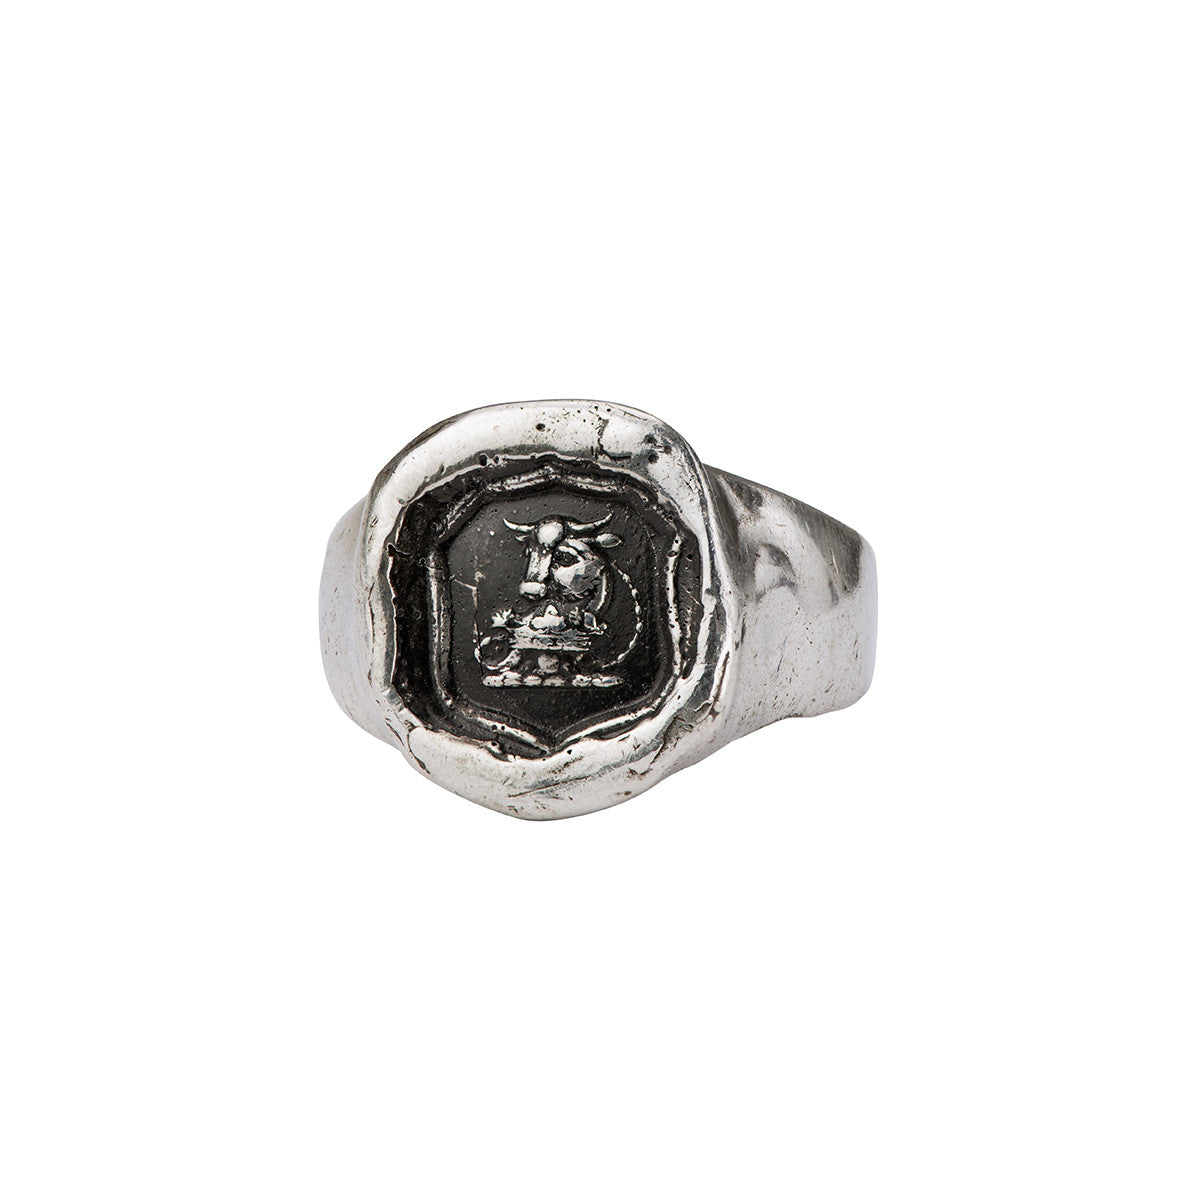 A sterling silver signet ring with our Fatherhood talisman on the band.